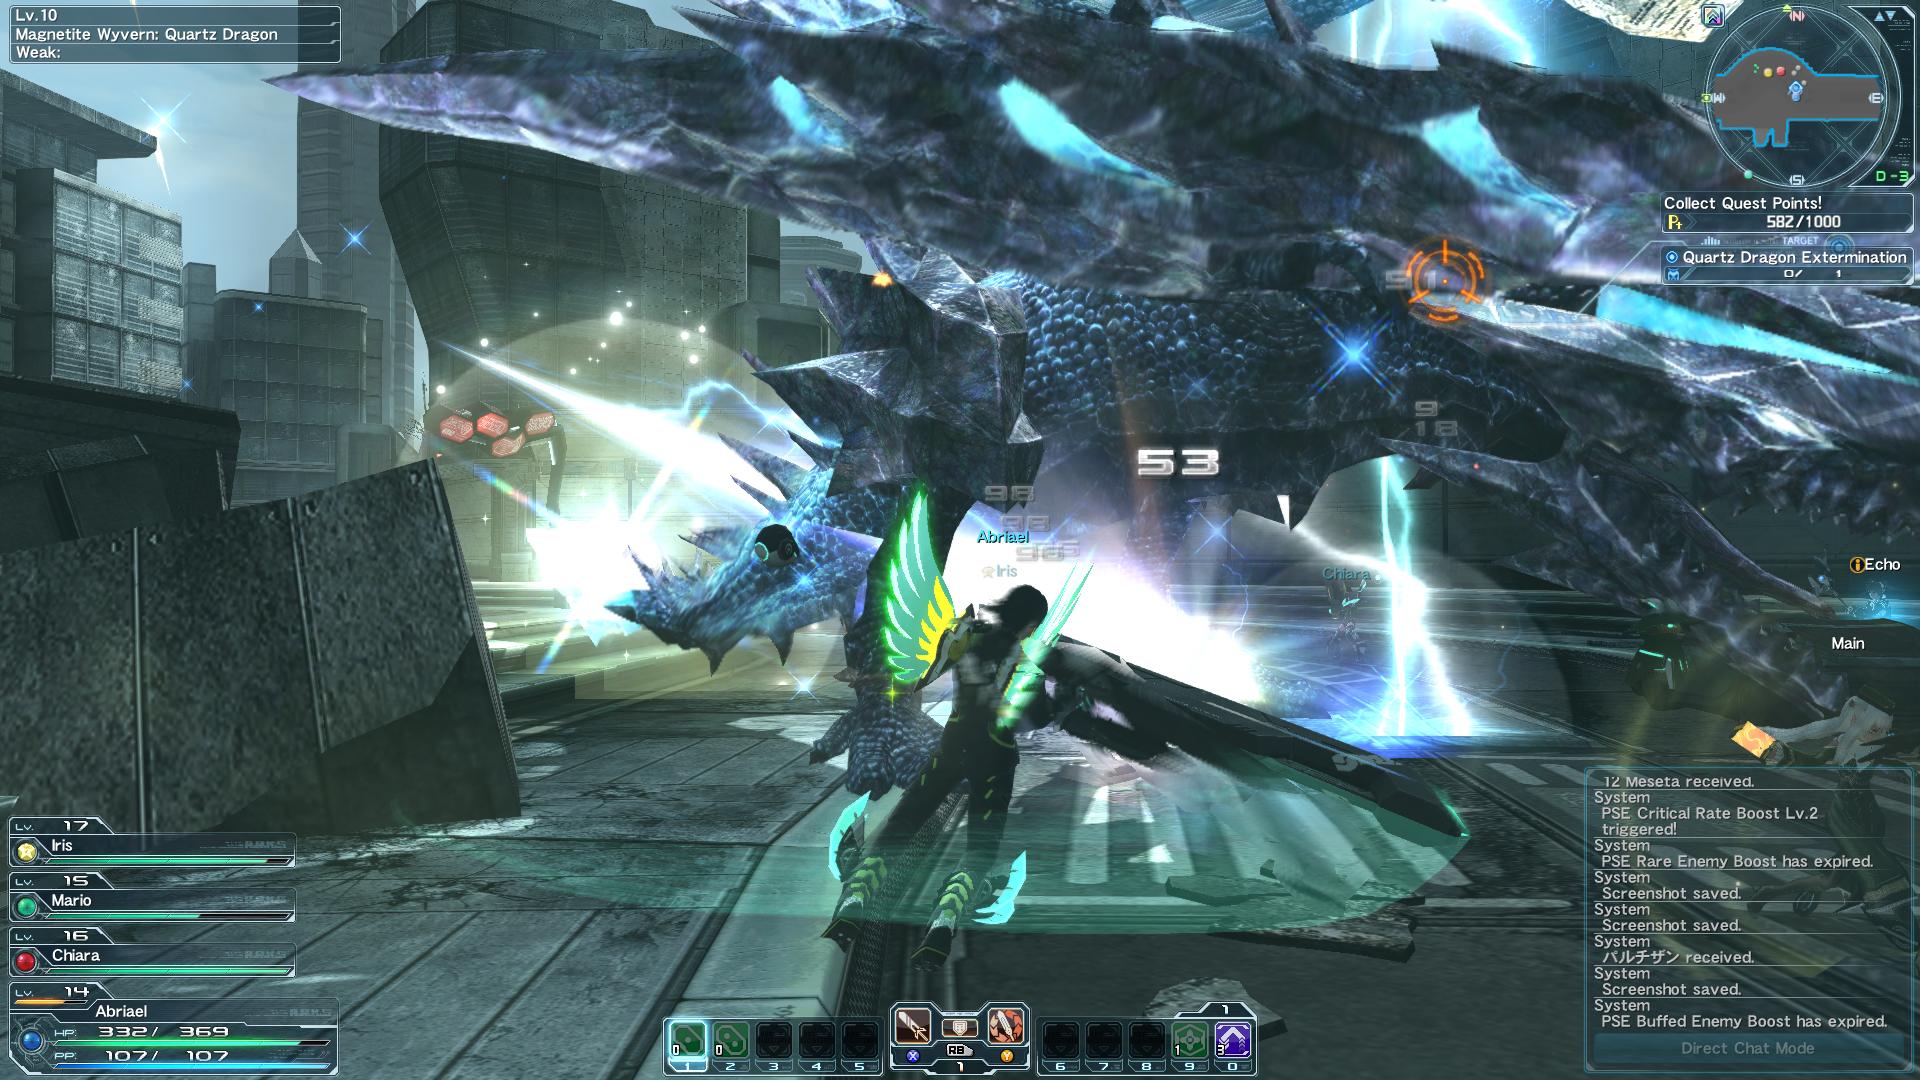 pso2 wallpaper,action adventure game,pc game,games,strategy video game,screenshot